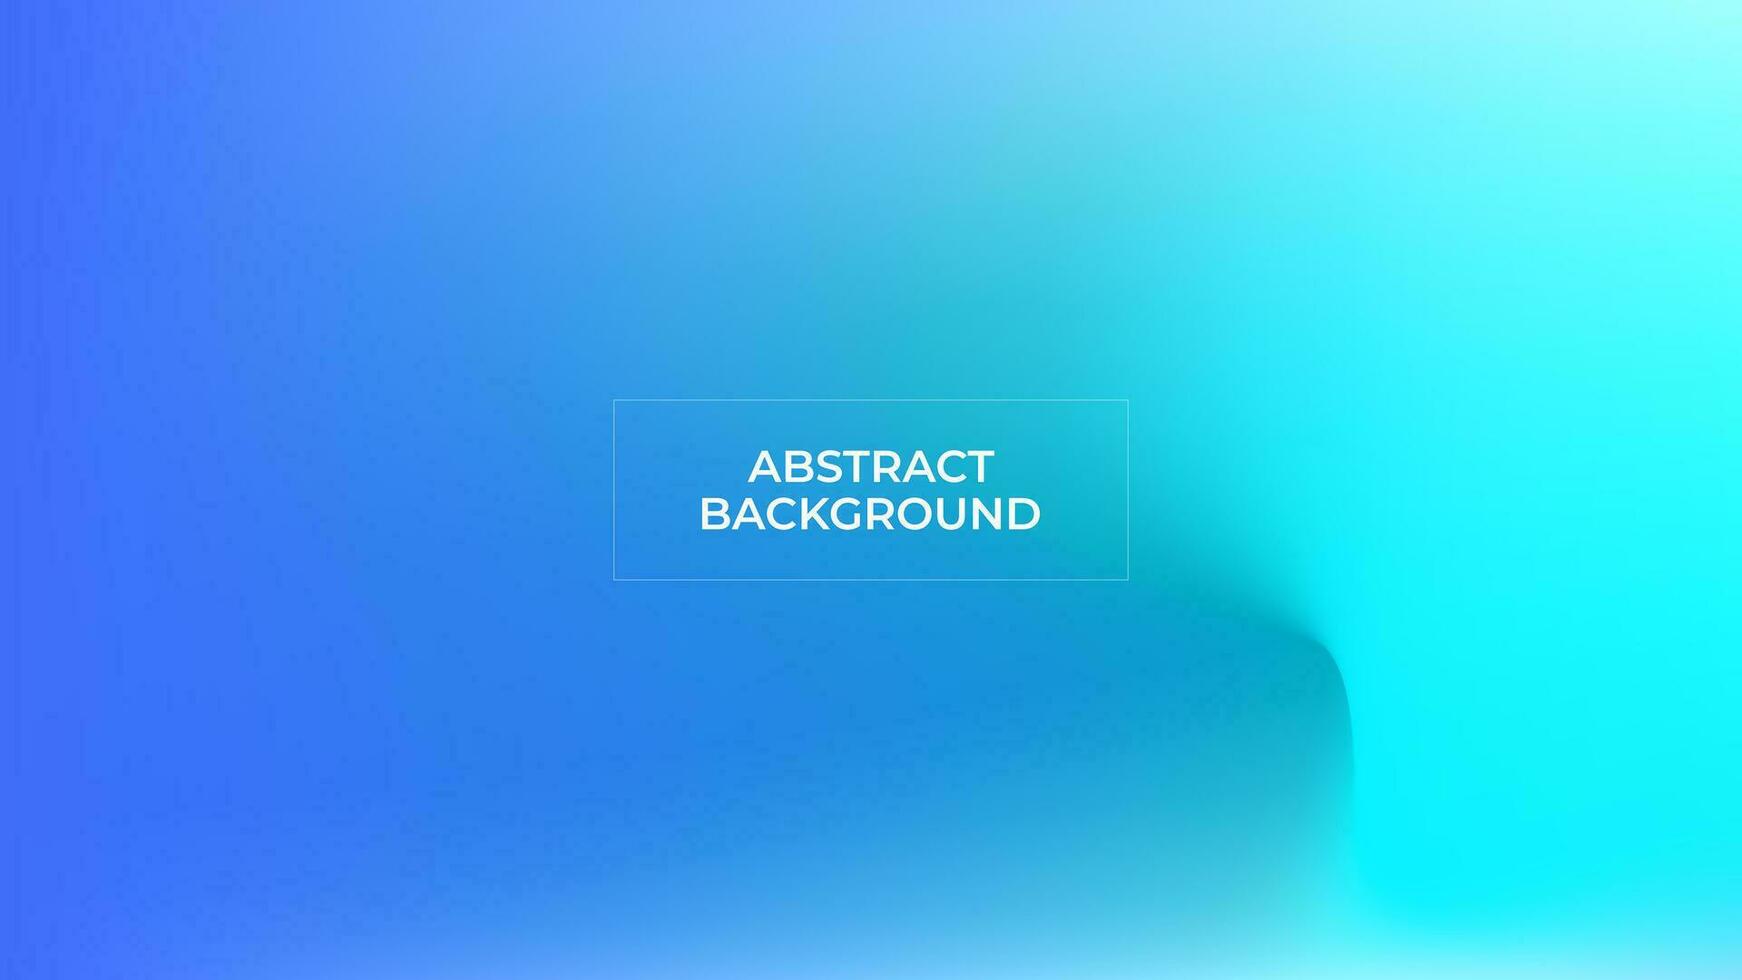 ABSTRACT BACKGROUND ELEGANT GRADIENT BLUE SMOOTH LIQUID COLOR DESIGN VECTOR TEMPLATE GOOD FOR MODERN WEBSITE, WALLPAPER, COVER DESIGN